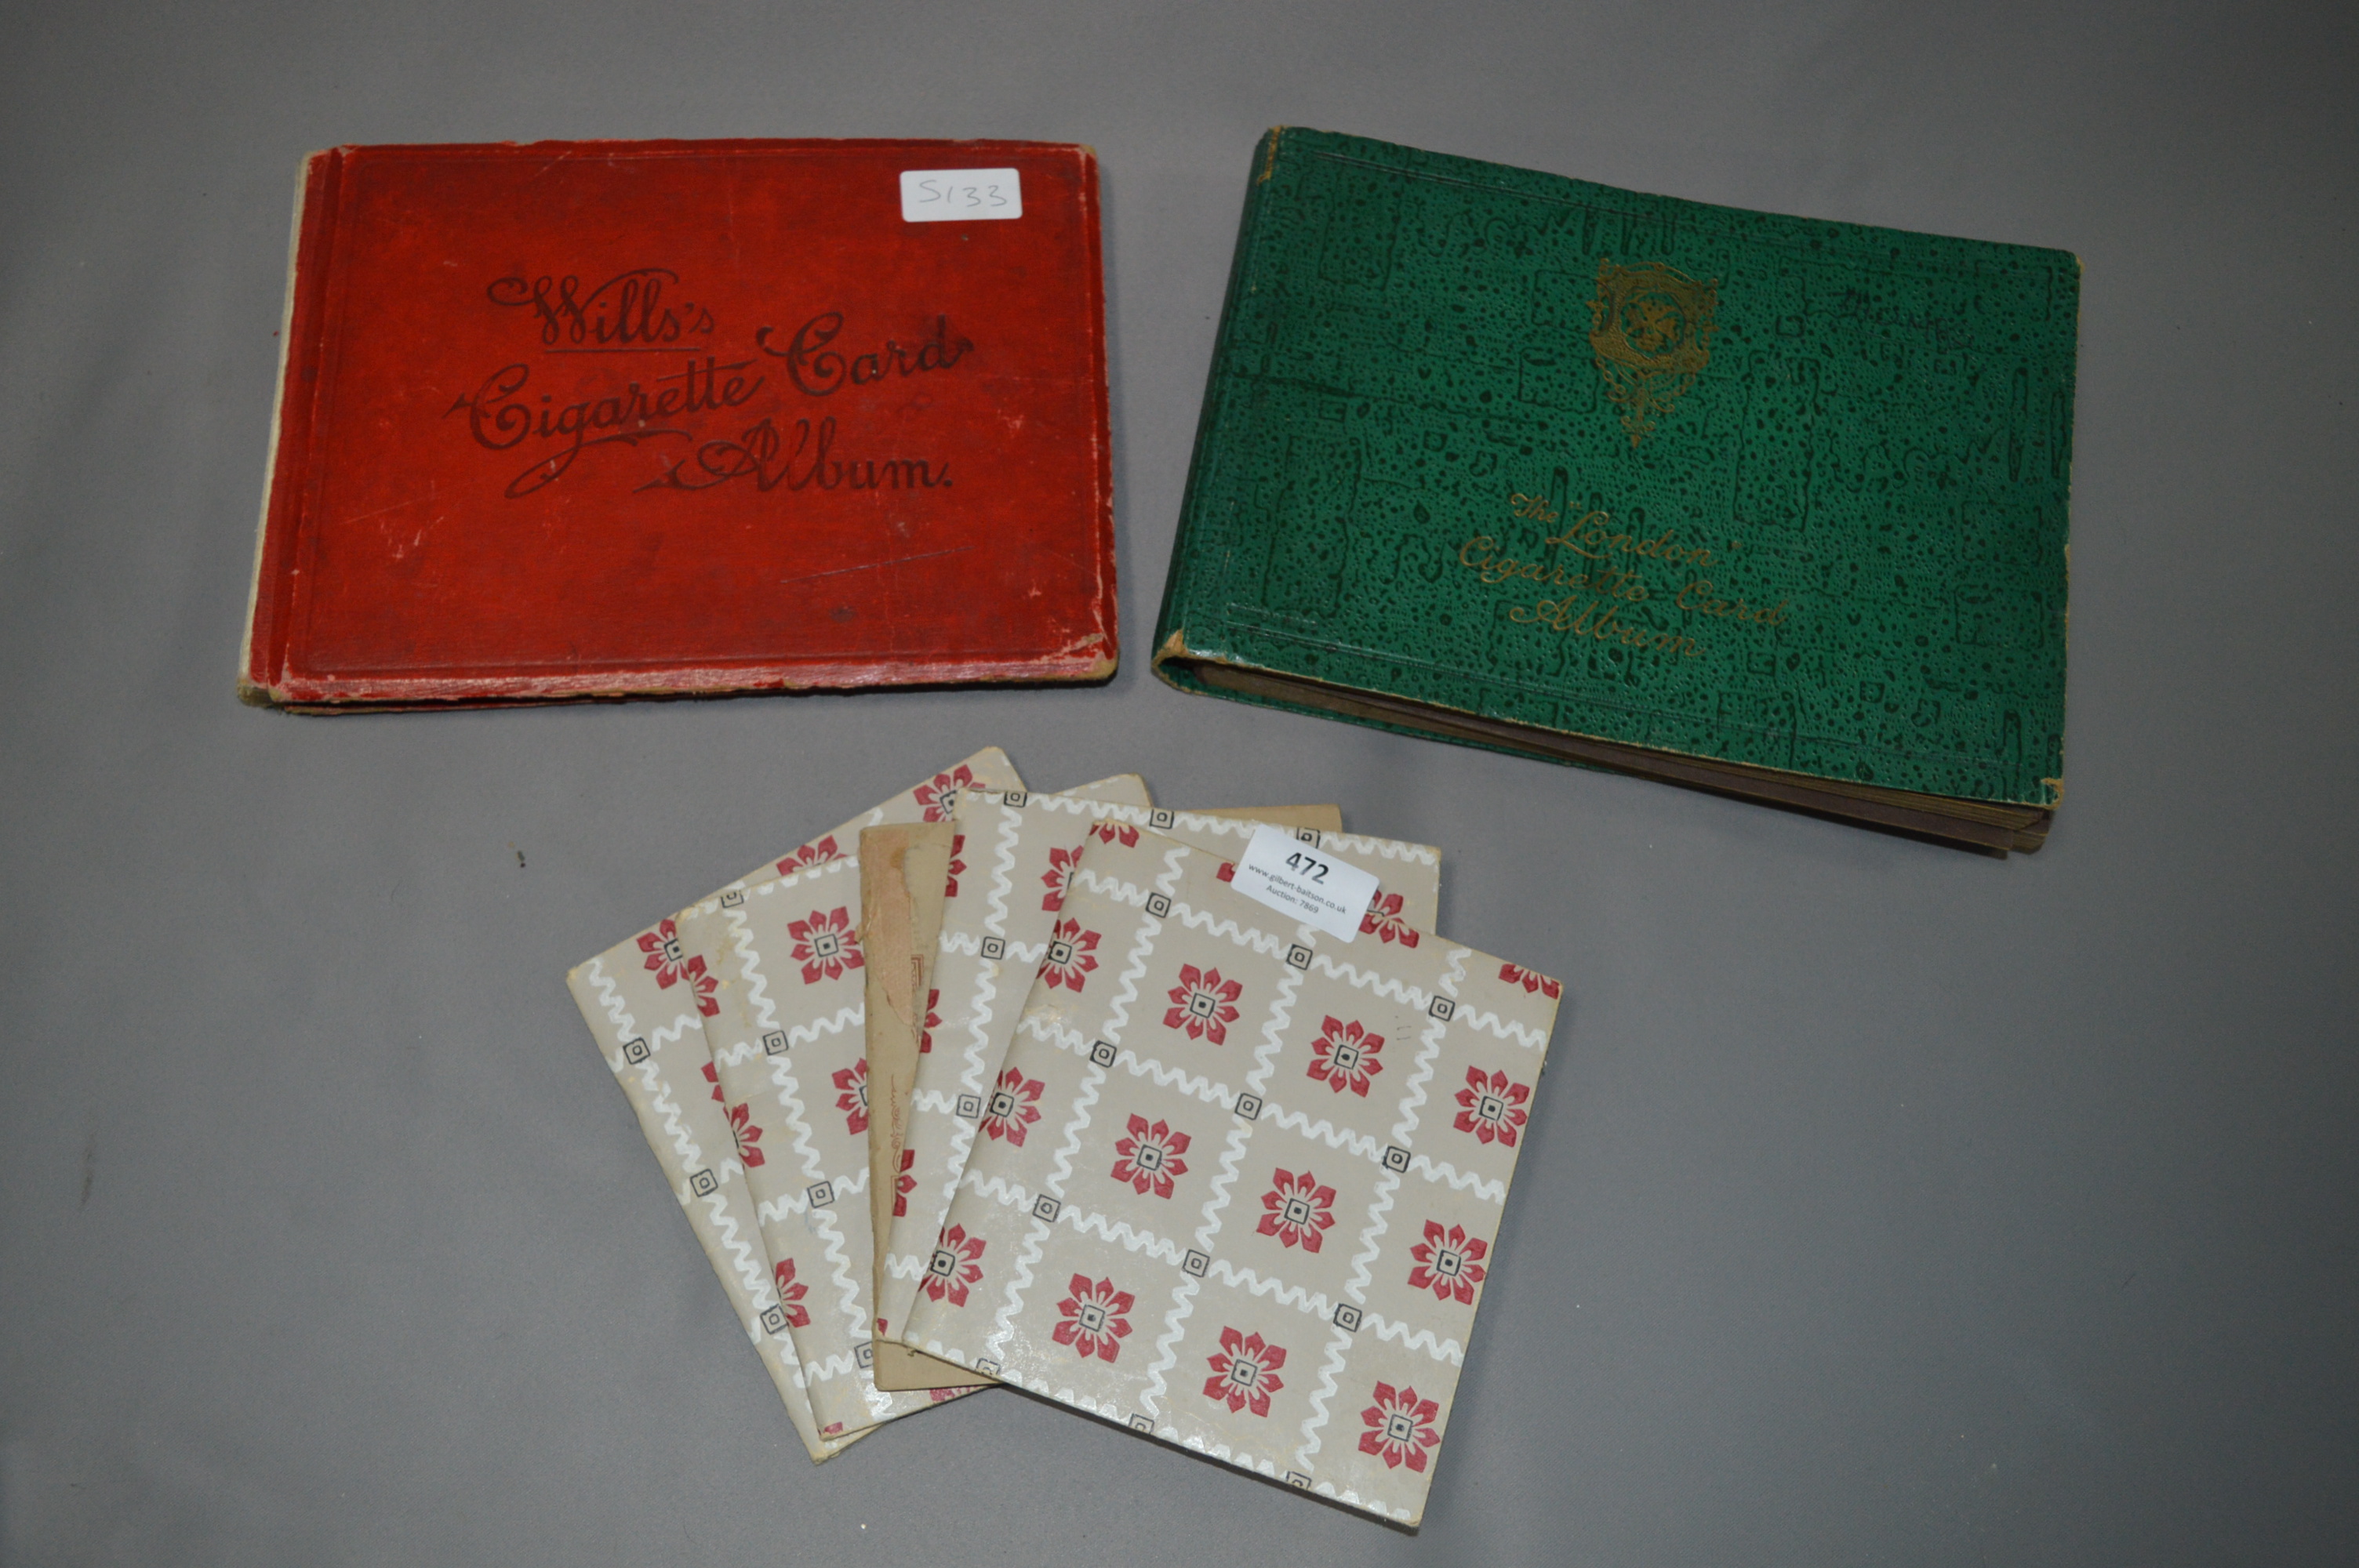 Will's and Other Cigarette Card Albums